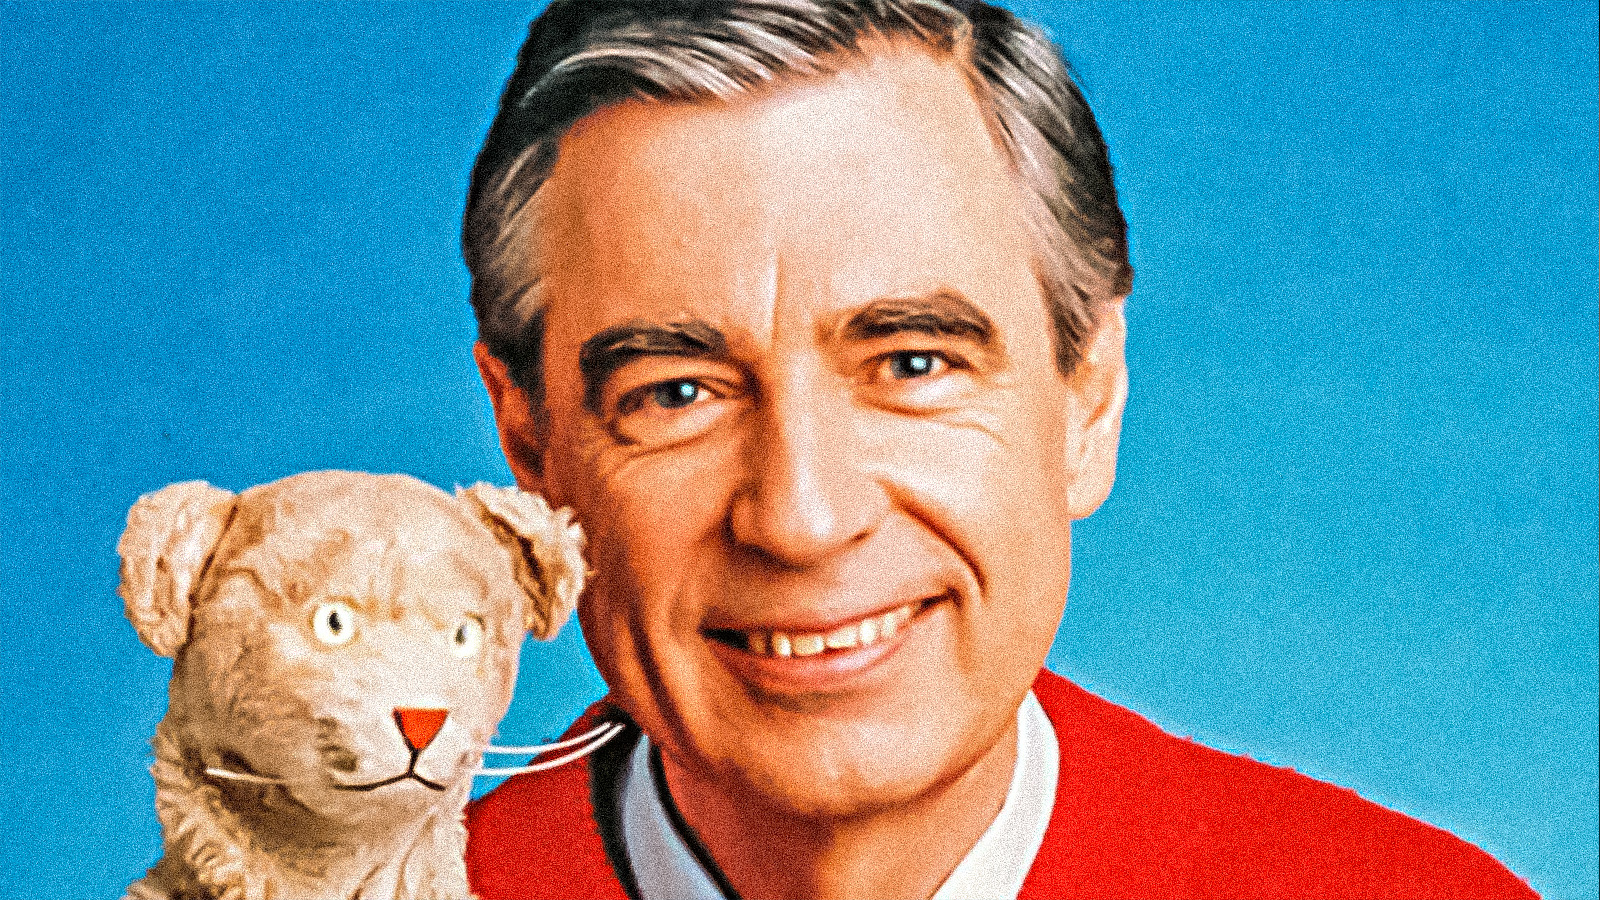 How to be as likeable as Mister Rogers